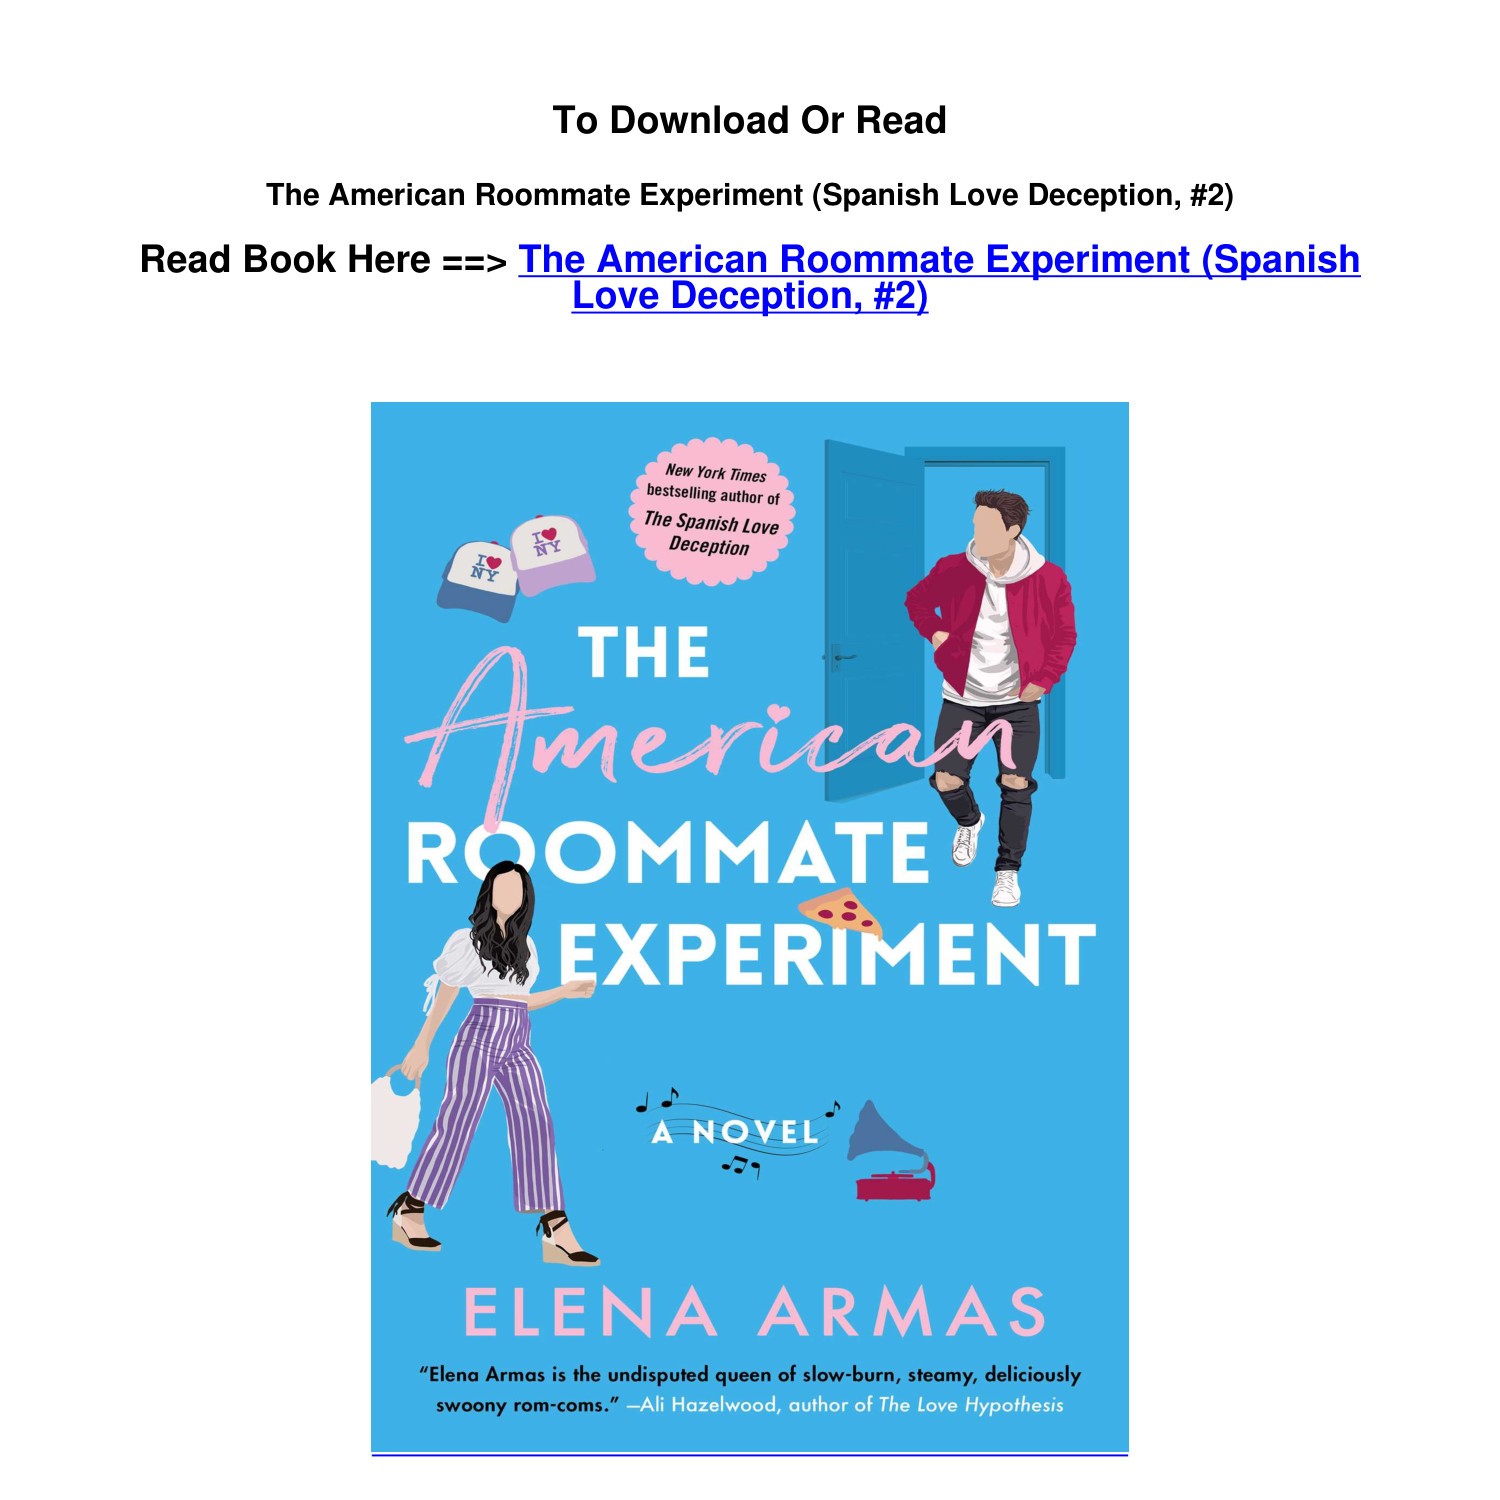 epub DOWNLOAD The American Roommate Experiment Spanish Love Deception 2 By  .pdf